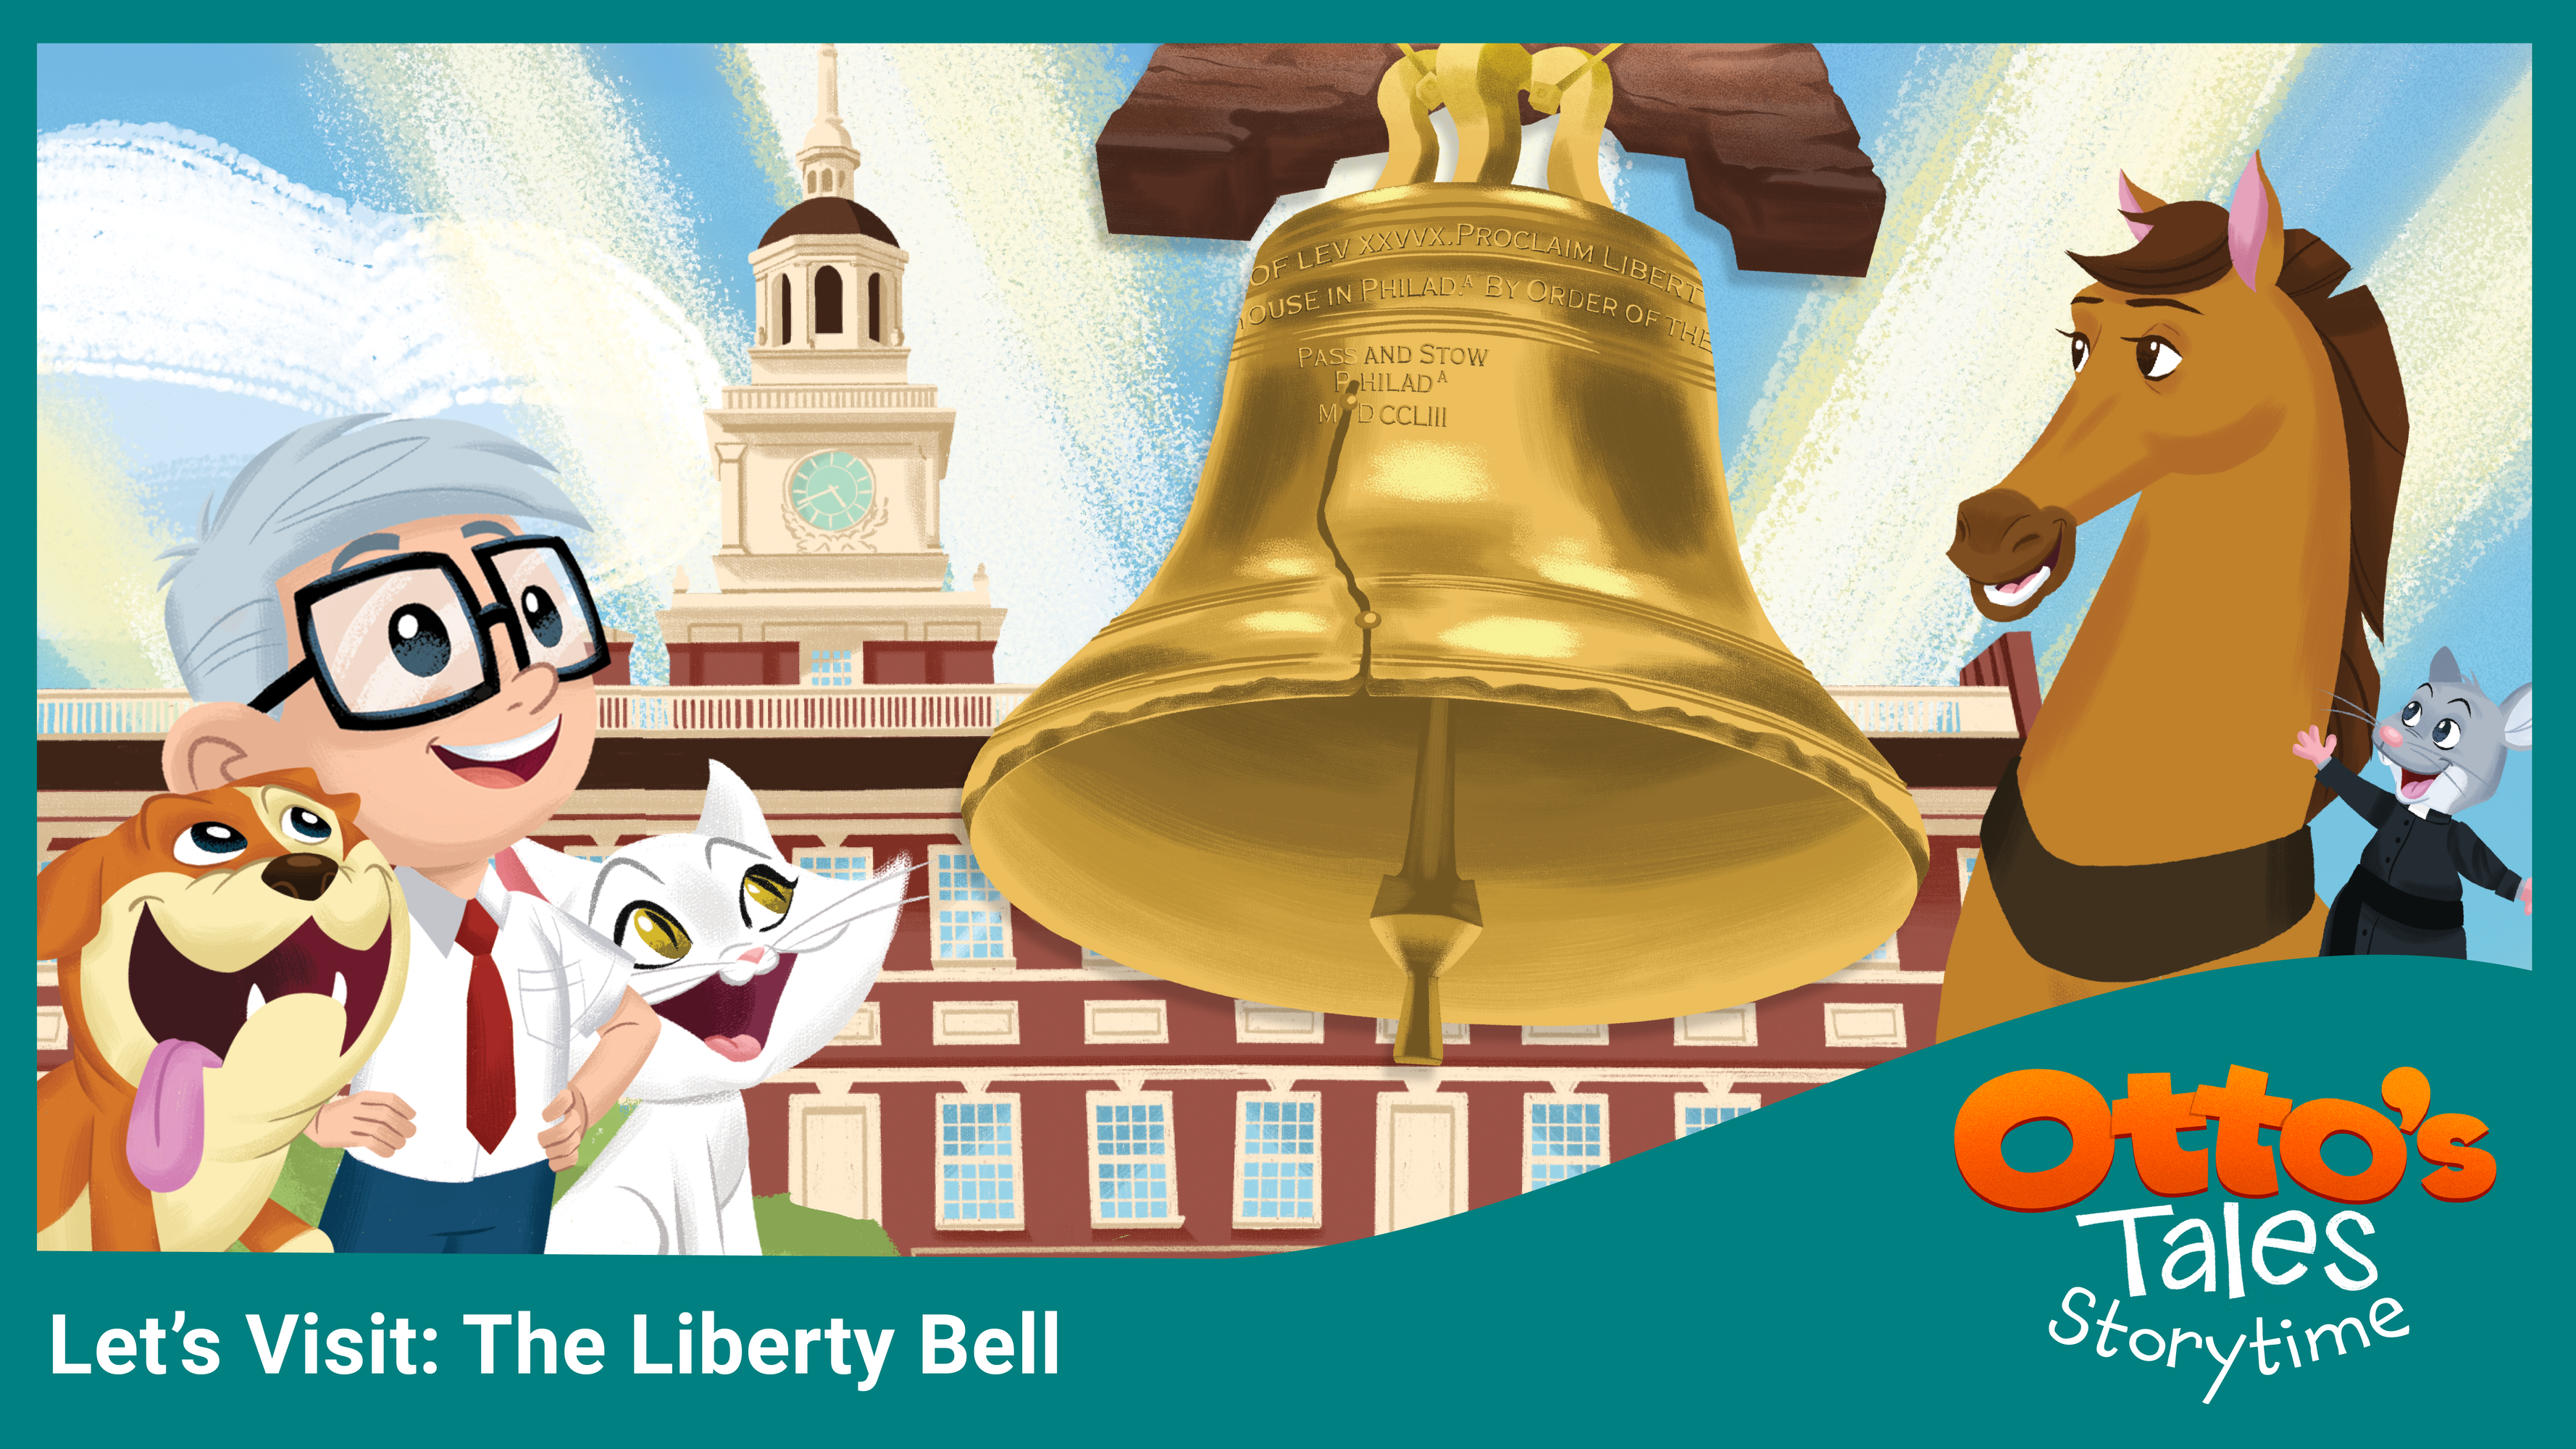 Let's Visit the Liberty Bell